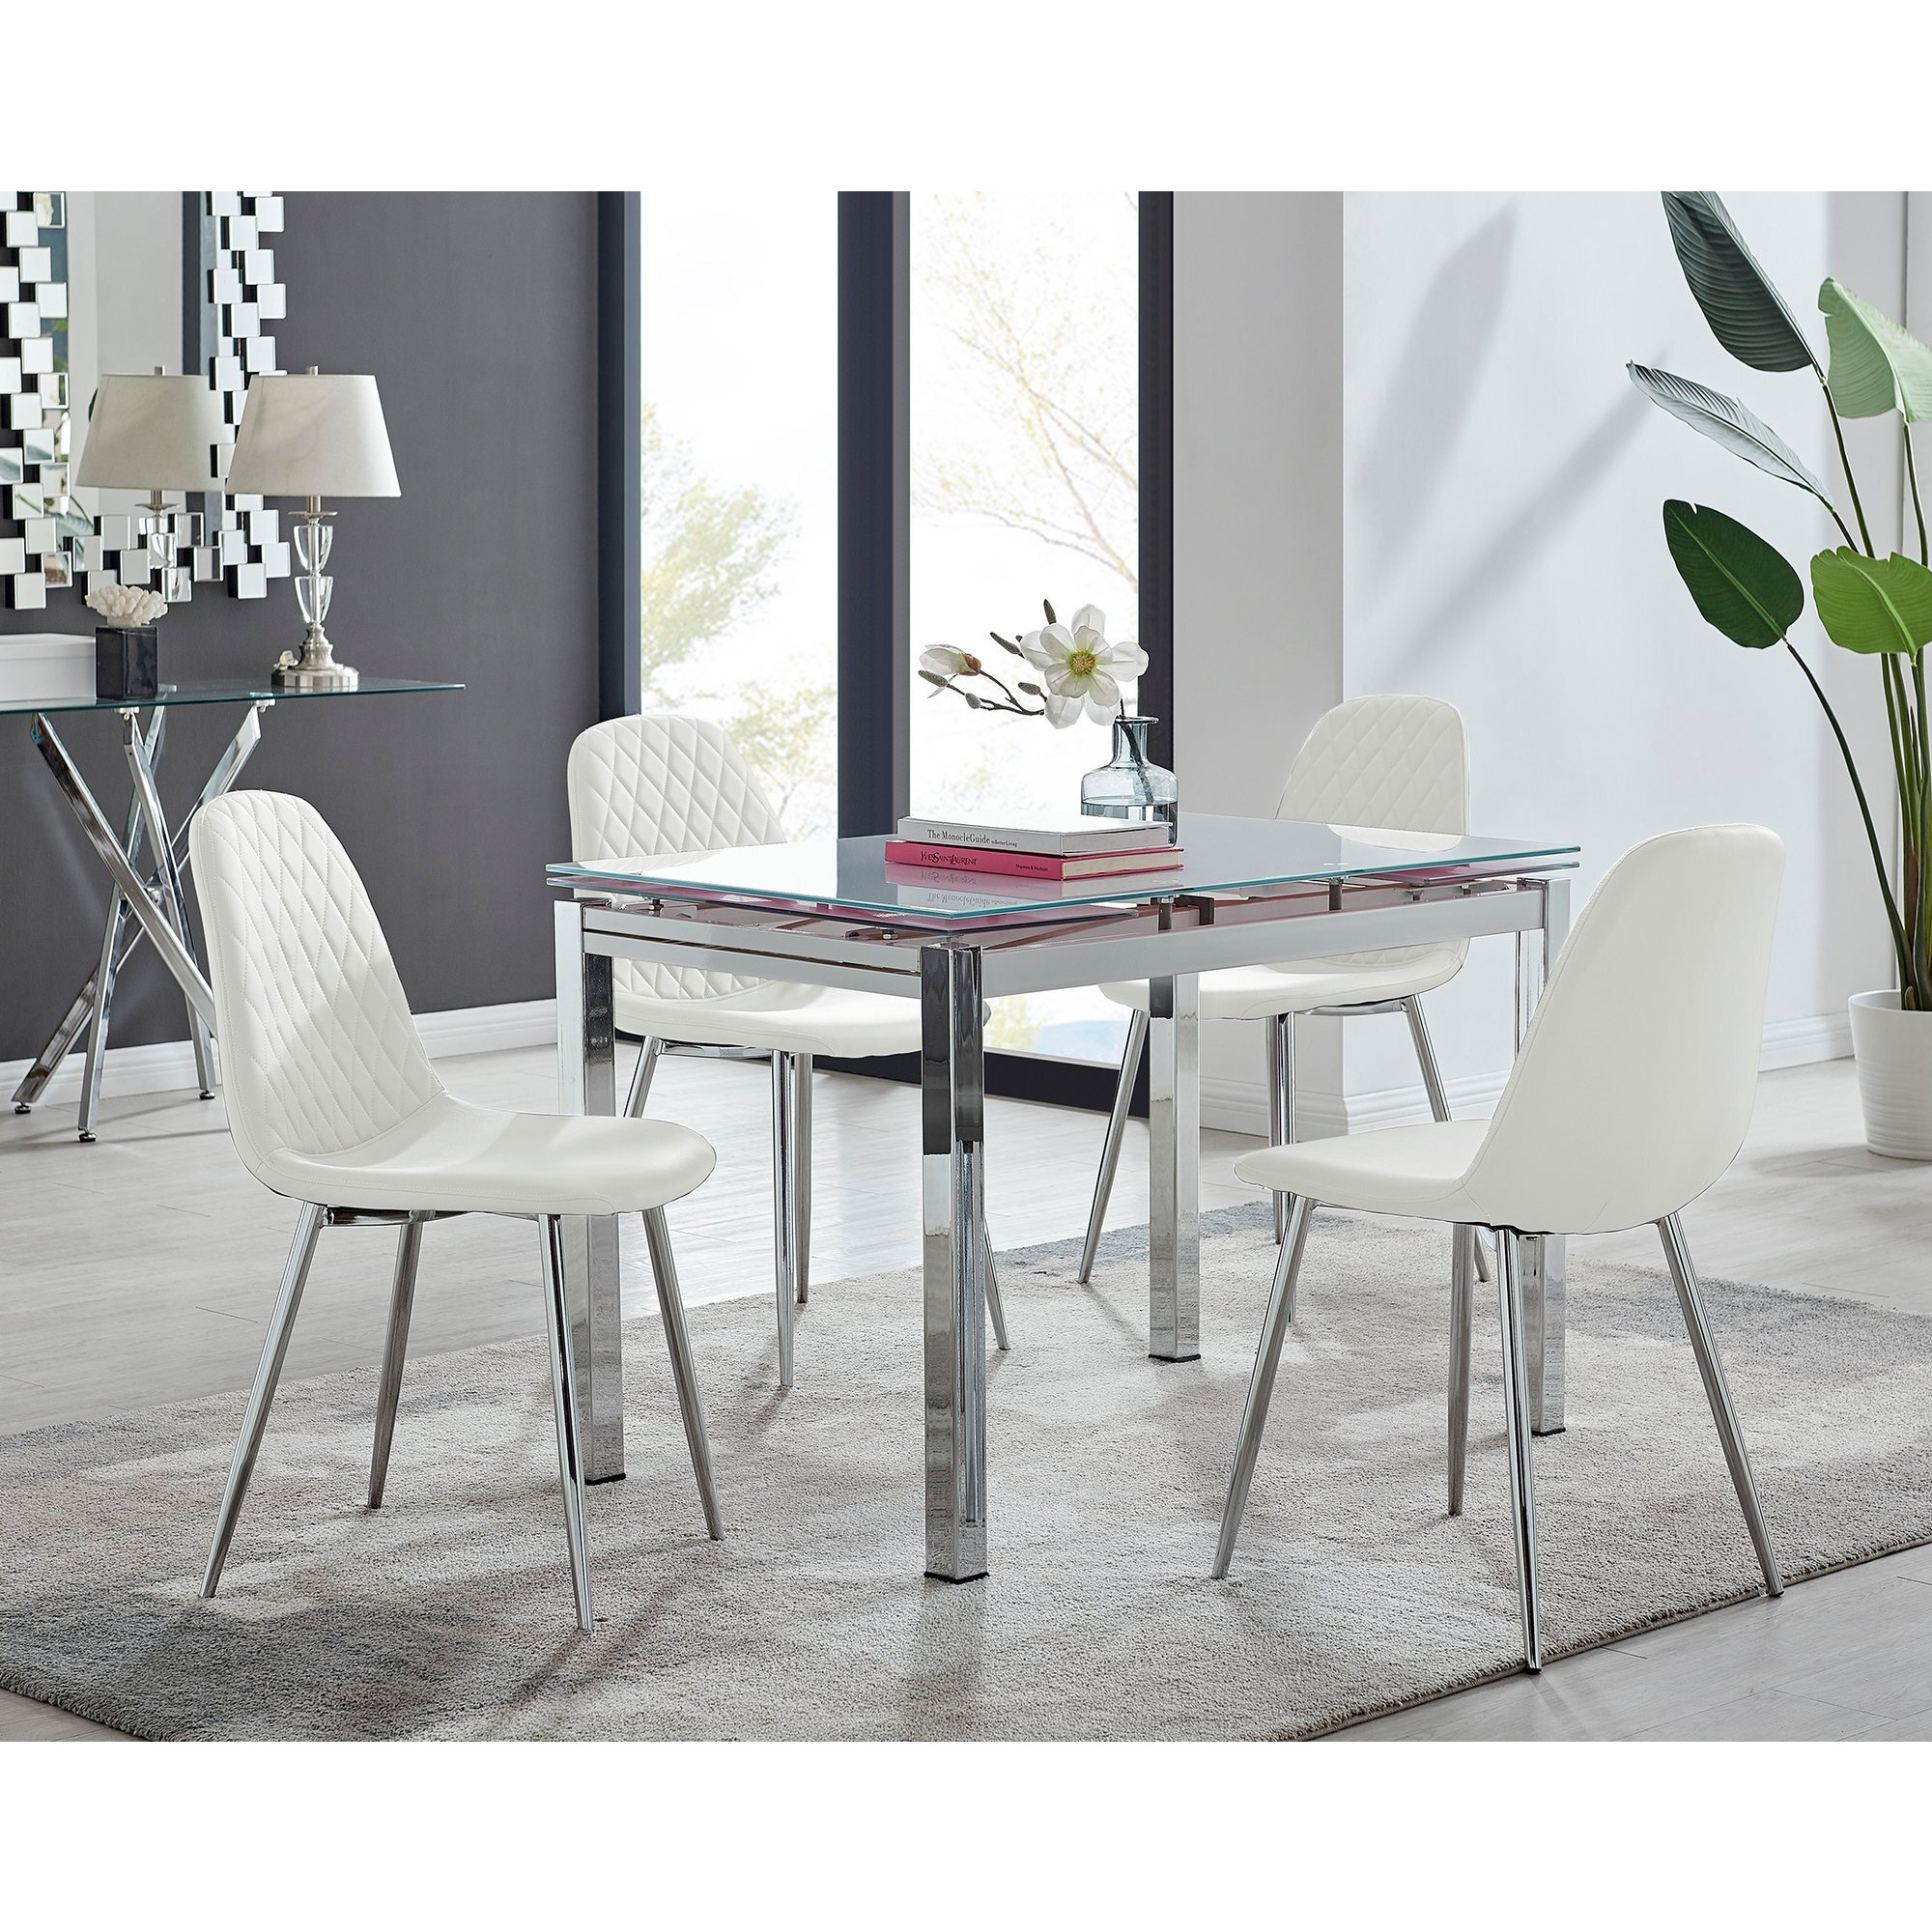 Enna White Glass Extending Dining Table and 4 Corona Silver Leg Chairs